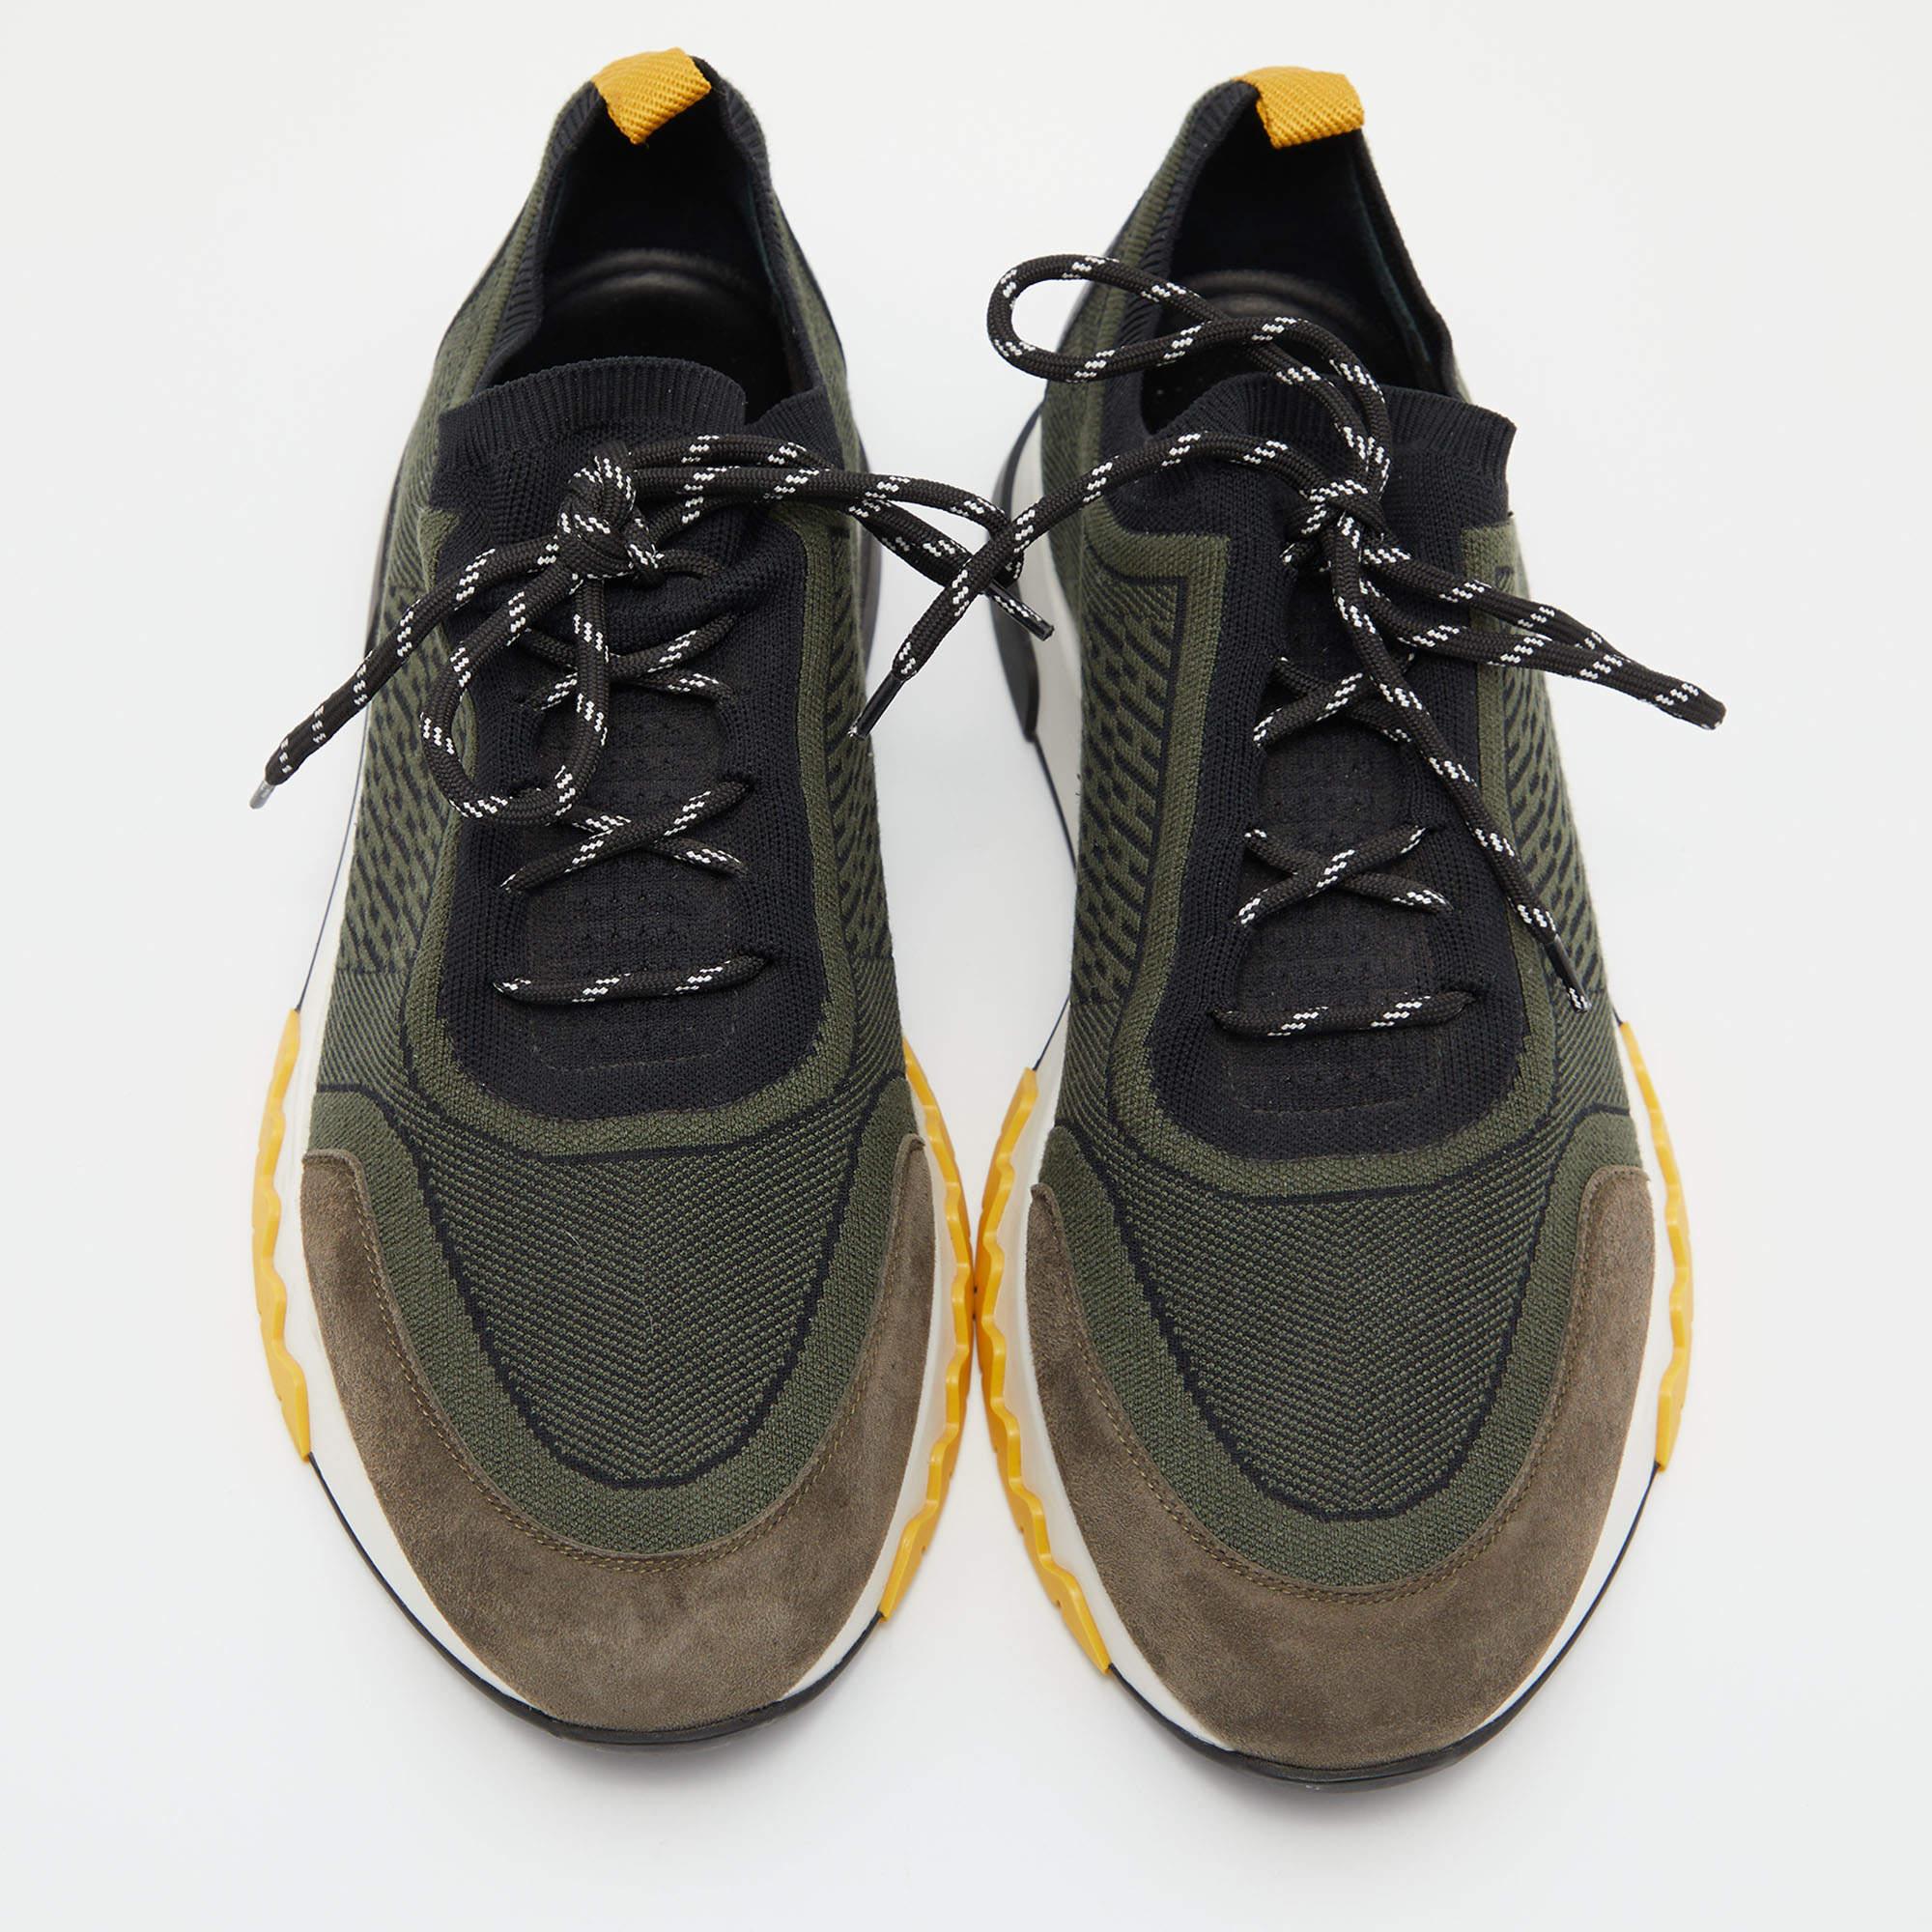 Hermes Green/Black Knit Fabric and Suede C-Addict Sneakers Size 42 2